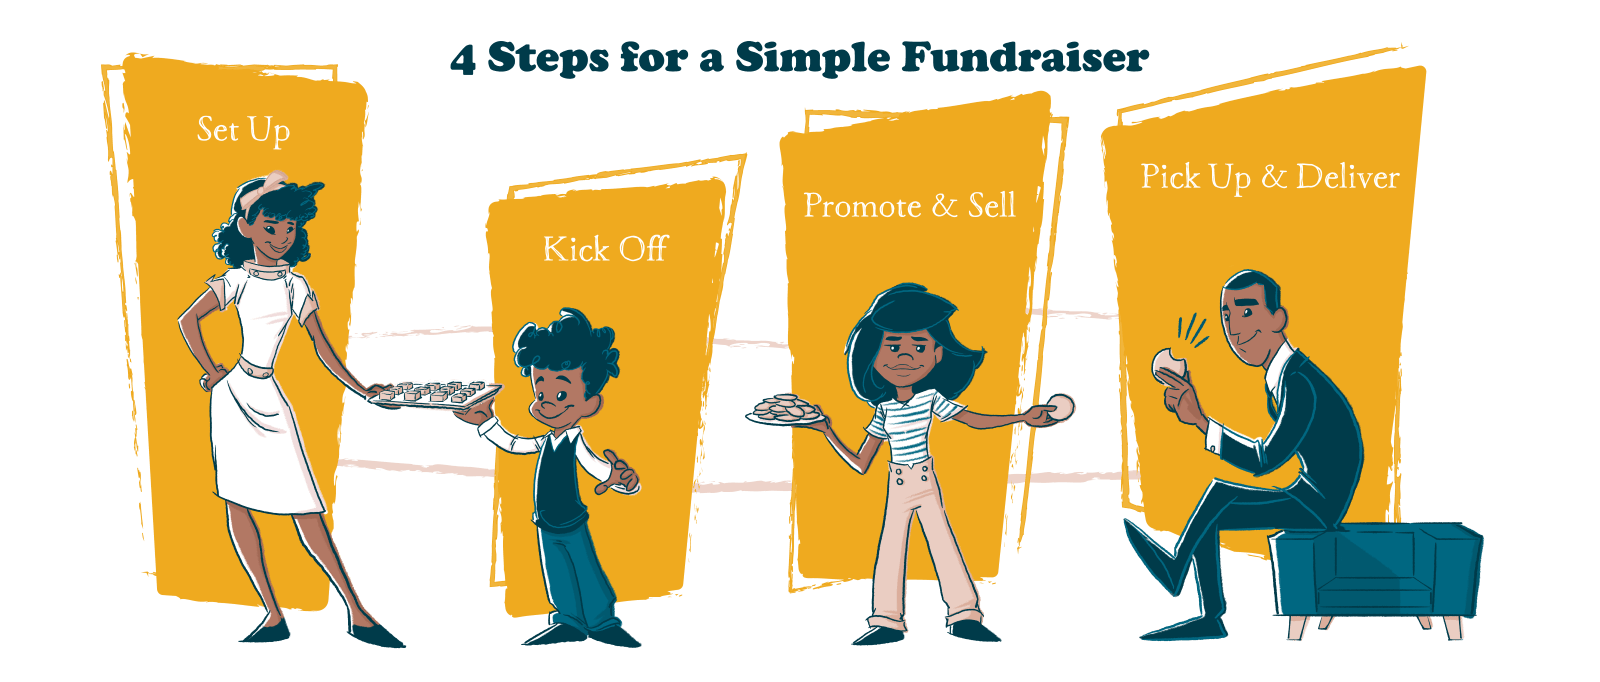 Illustration of a family: mom, son, daughter, and dad. They are handing off cookies to one another as they go down the line. Each one represents a step in the Wooden Spoon fundraising process: set up, kick off, promote & sell, pick up & deliver. The title of the image is "4 Steps for a Simple Fundraiser".